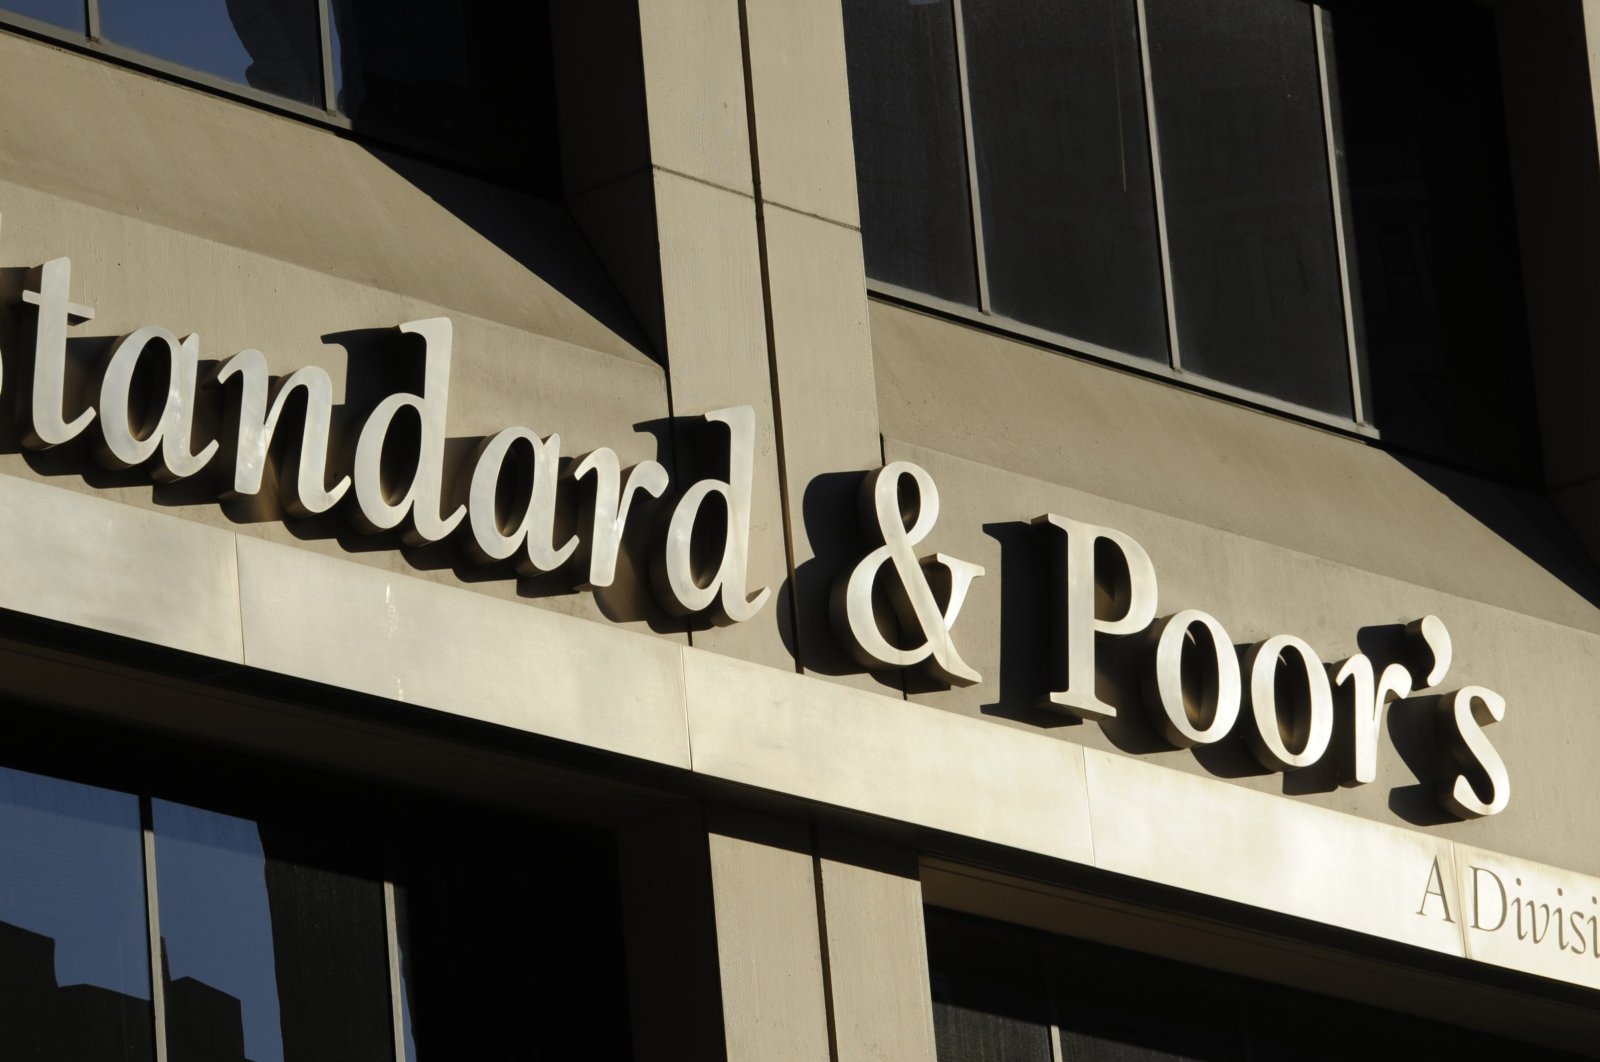 The Standard & Poor's Corp. sign is displayed outside of their headquarters in New York City, New York, U.S. (AP Photo)